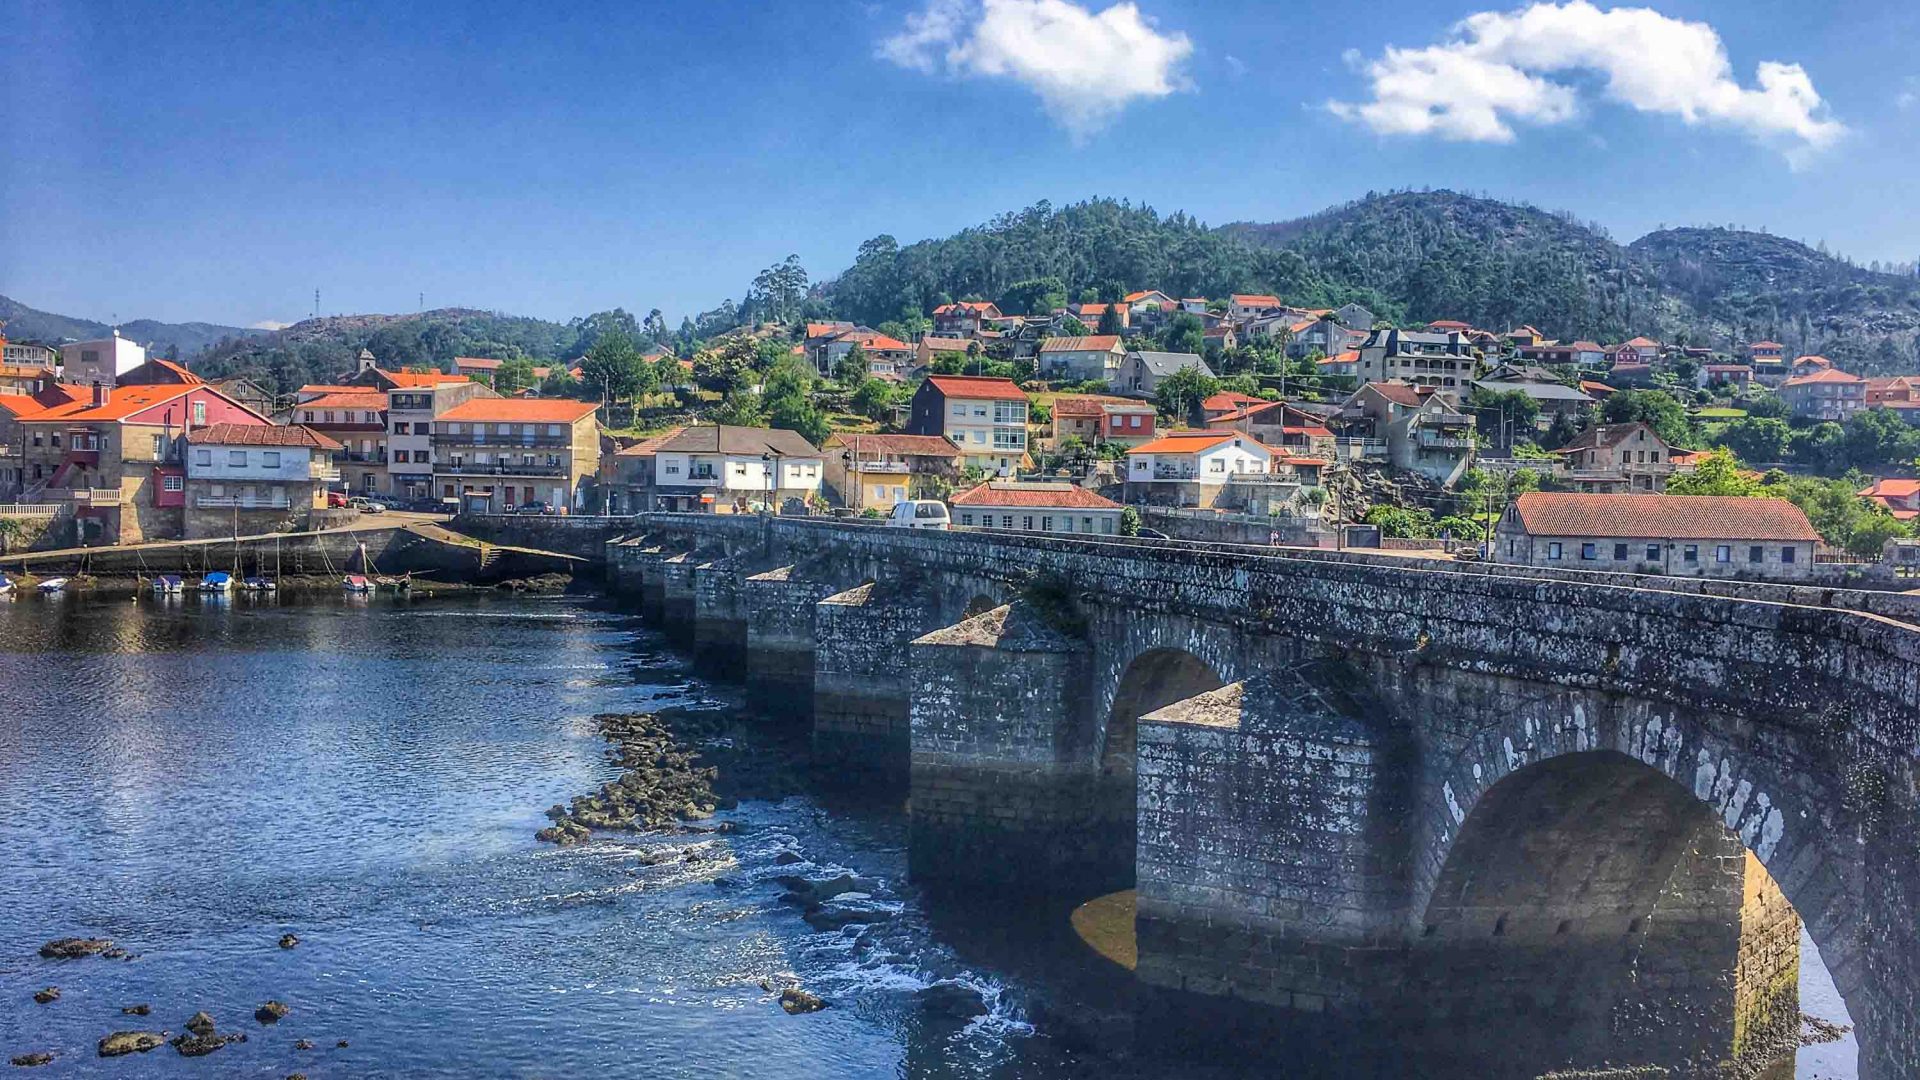 A Roman bridge in Ponte de Lima, Portugal, one of the larger towns that hikers pass through on the Camino Portugues.